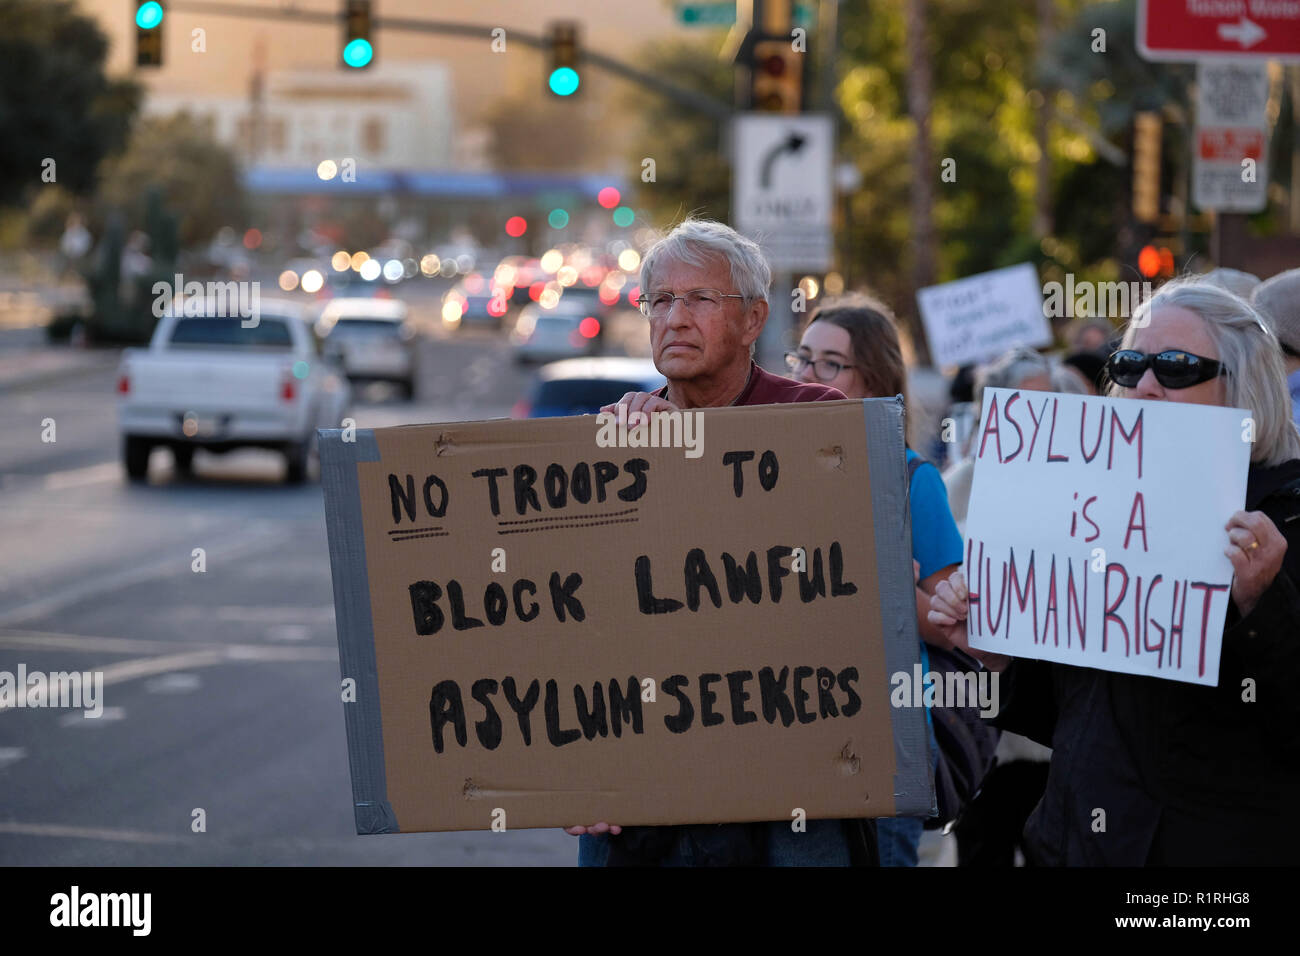 November 13, 2018 - Tucson, Arizona, USA - Pro immigrants rights protest in Tucson in support of the migrant caravan traveling through Mexico towards the US border. They denounced the stationing of US troops by President Trump on the border to hault the caravan if they reach the Arizona and support the migrants rights to apply for asylum. (Credit Image: © Christopher Brown/ZUMA Wire) Stock Photo